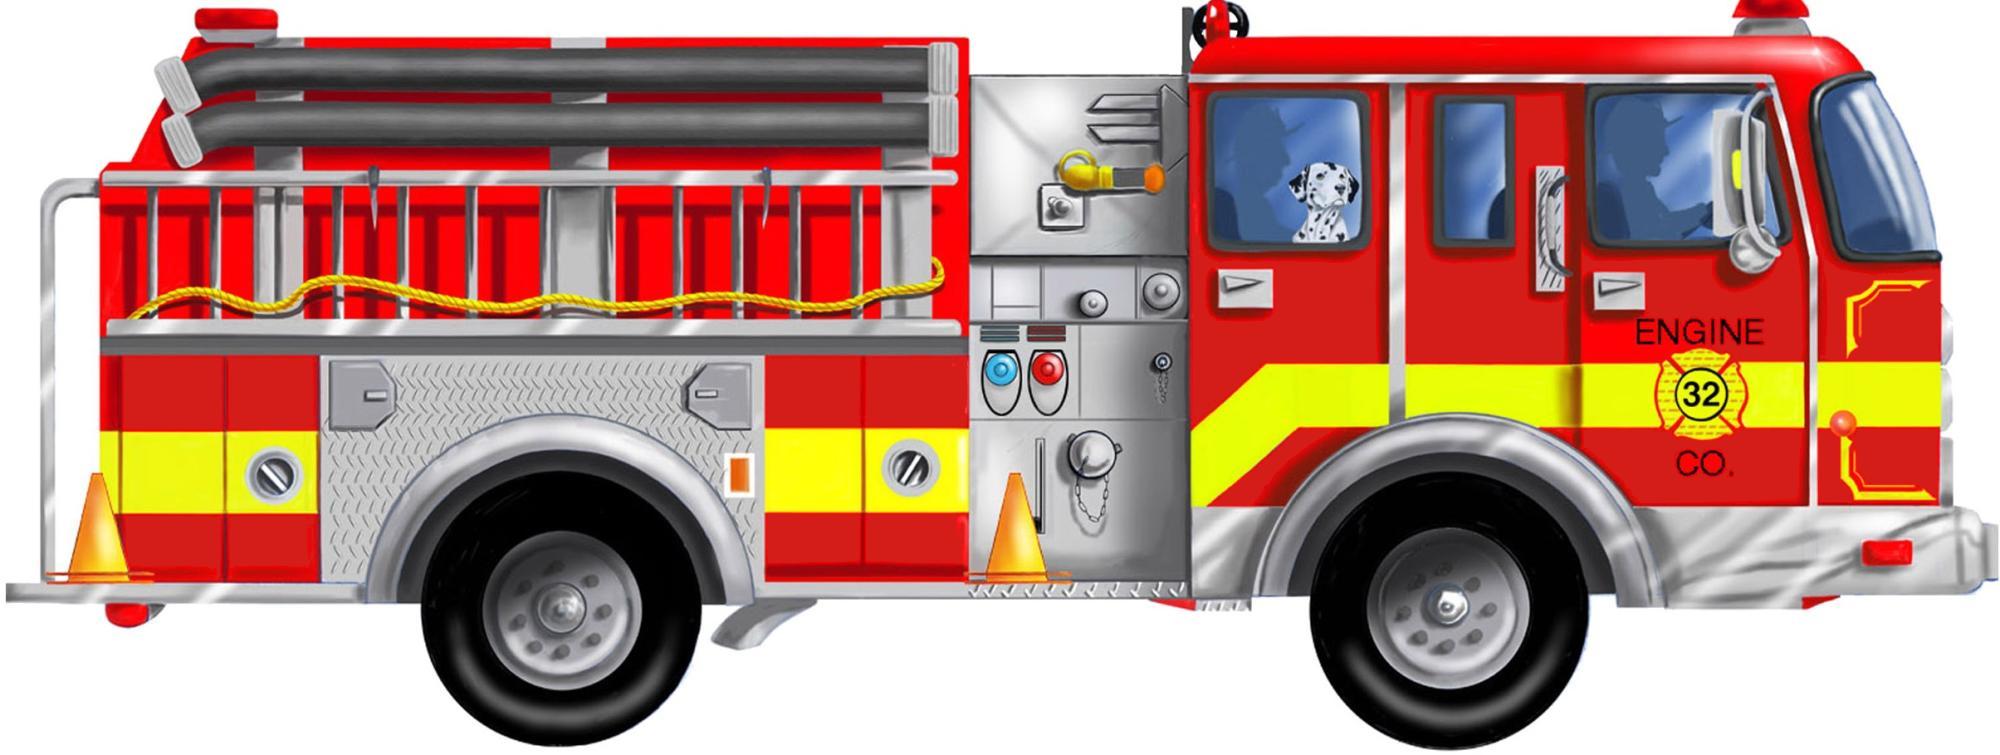 Fire truck clipart black and 